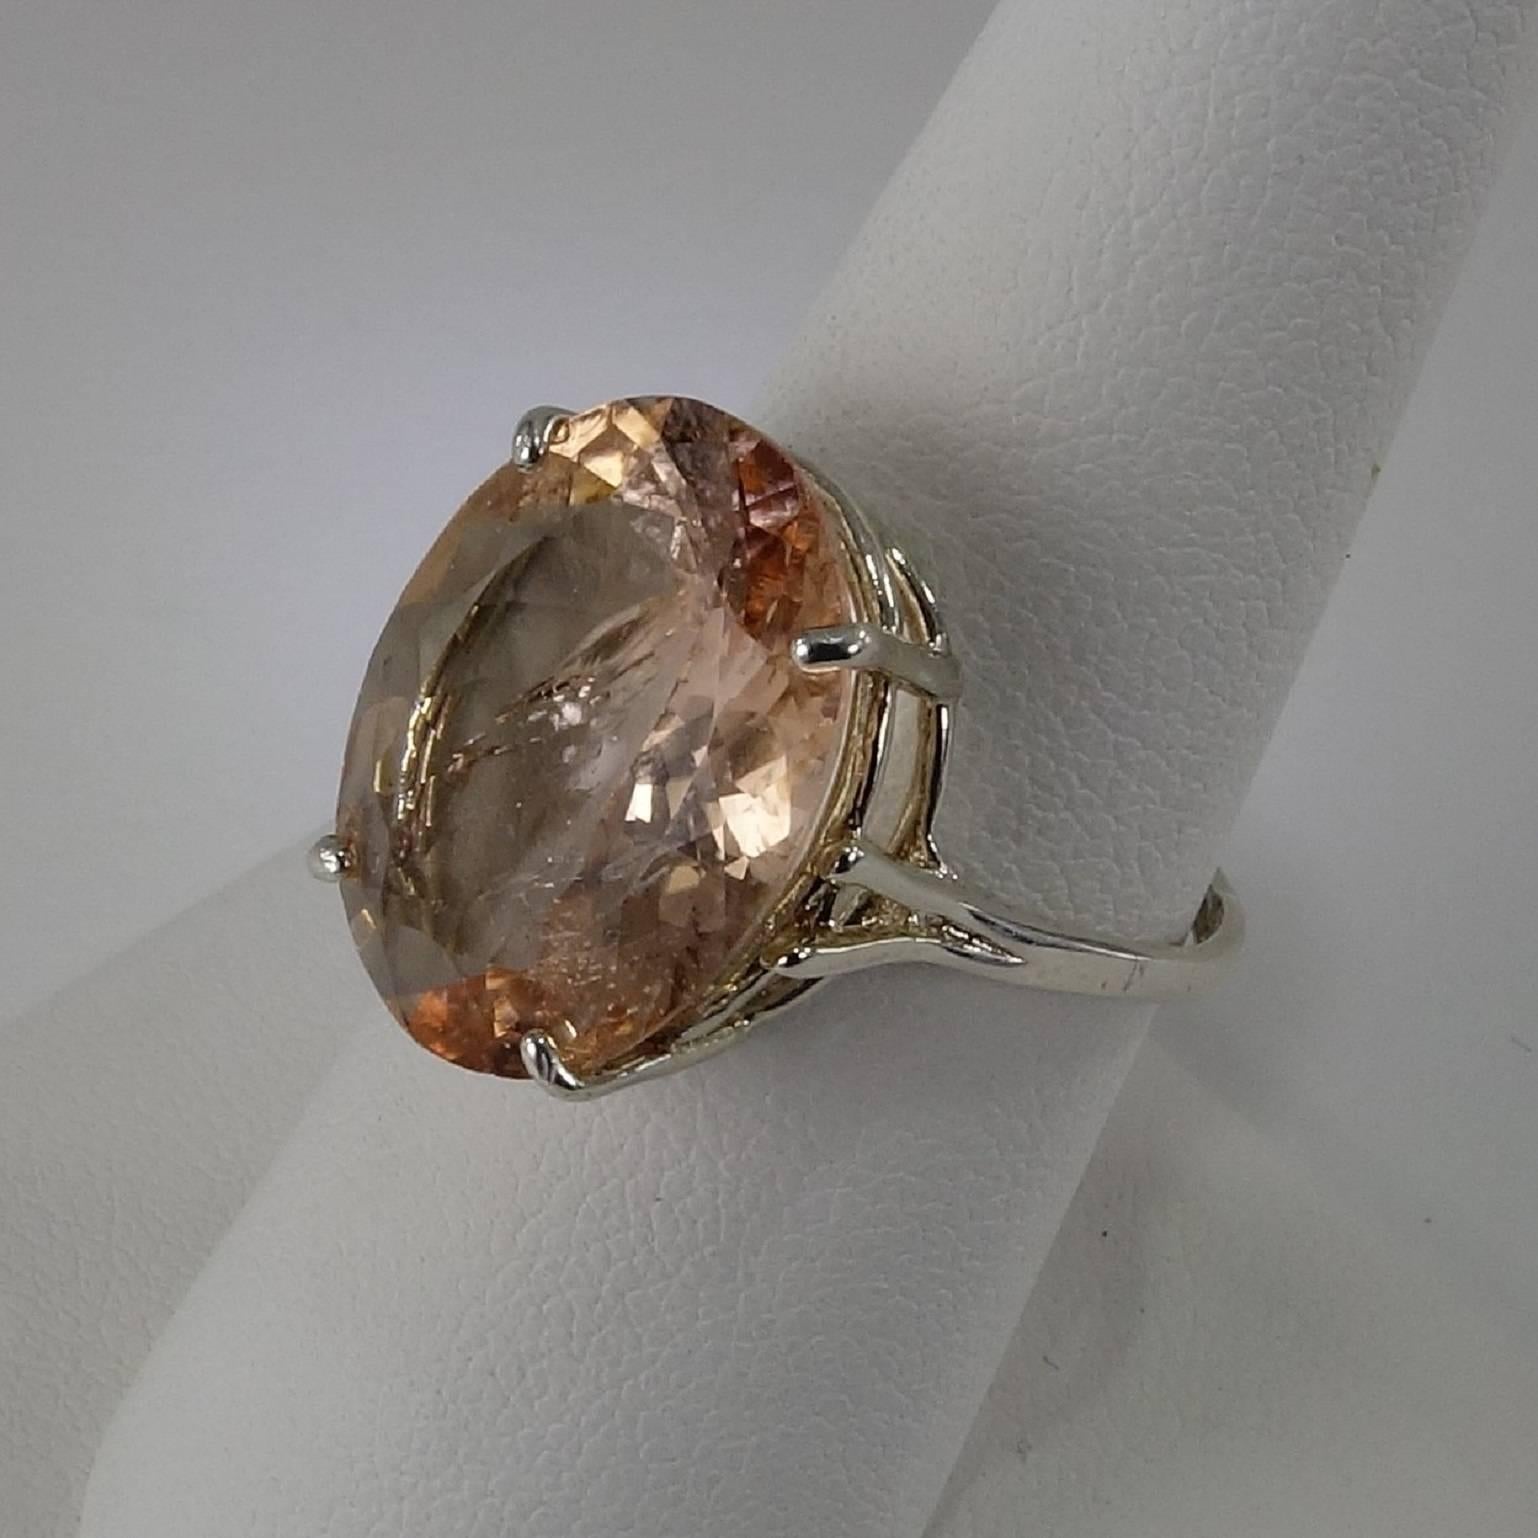 Sterling Silver Basket style ring holds a Sparkly peachy Morganite with all the delightful natural inclusions typical of a Morganite. The Morganite is 18mm x 14mm and approx 9.04ct. Size 8.5